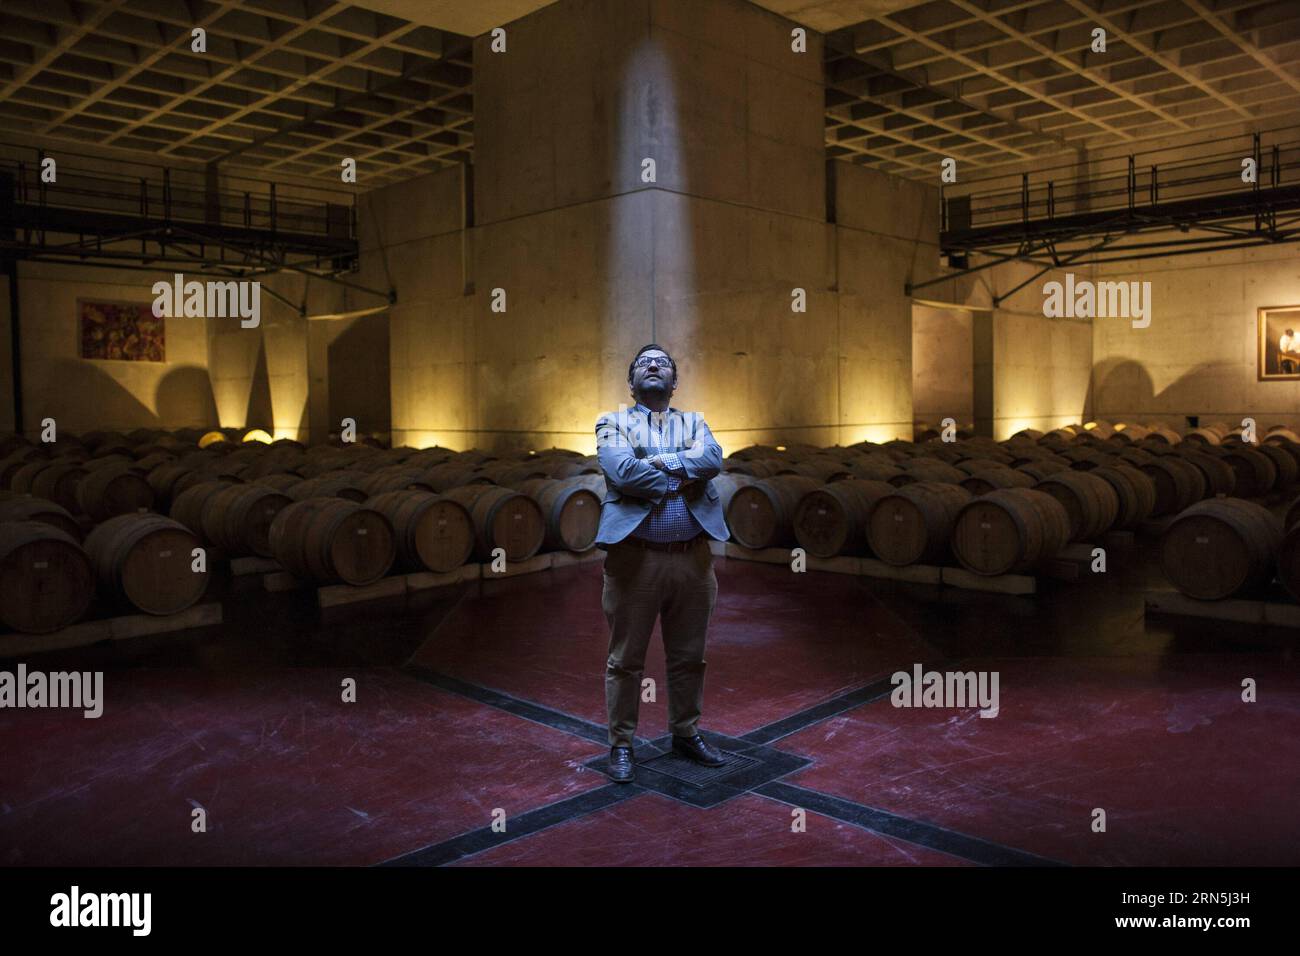 Image taken on June 25, 2015 shows Jose Manuel Ortega Gil-Fournier, president of the O. Fournier Winery, posing in the barrels room located in the basement of the O. Fournier Wineryin, in La Consulta city, Mendoza province, 1,170km away of Buenos Aires city, Argentina. ) (jg) (da) ARGENTINA-MENDOZA-INDUSTRY-WINE-FEATURE MARTINxZABALA PUBLICATIONxNOTxINxCHN   Image Taken ON June 25 2015 Shows Jose Manuel Ortega Gil Fournier President of The O Fournier Winery Posing in The Barrels Room Located in The Basement of The O Fournier  in La CONSULTA City Mendoza Province 1 170km Away of Buenos Aires Ci Stock Photo